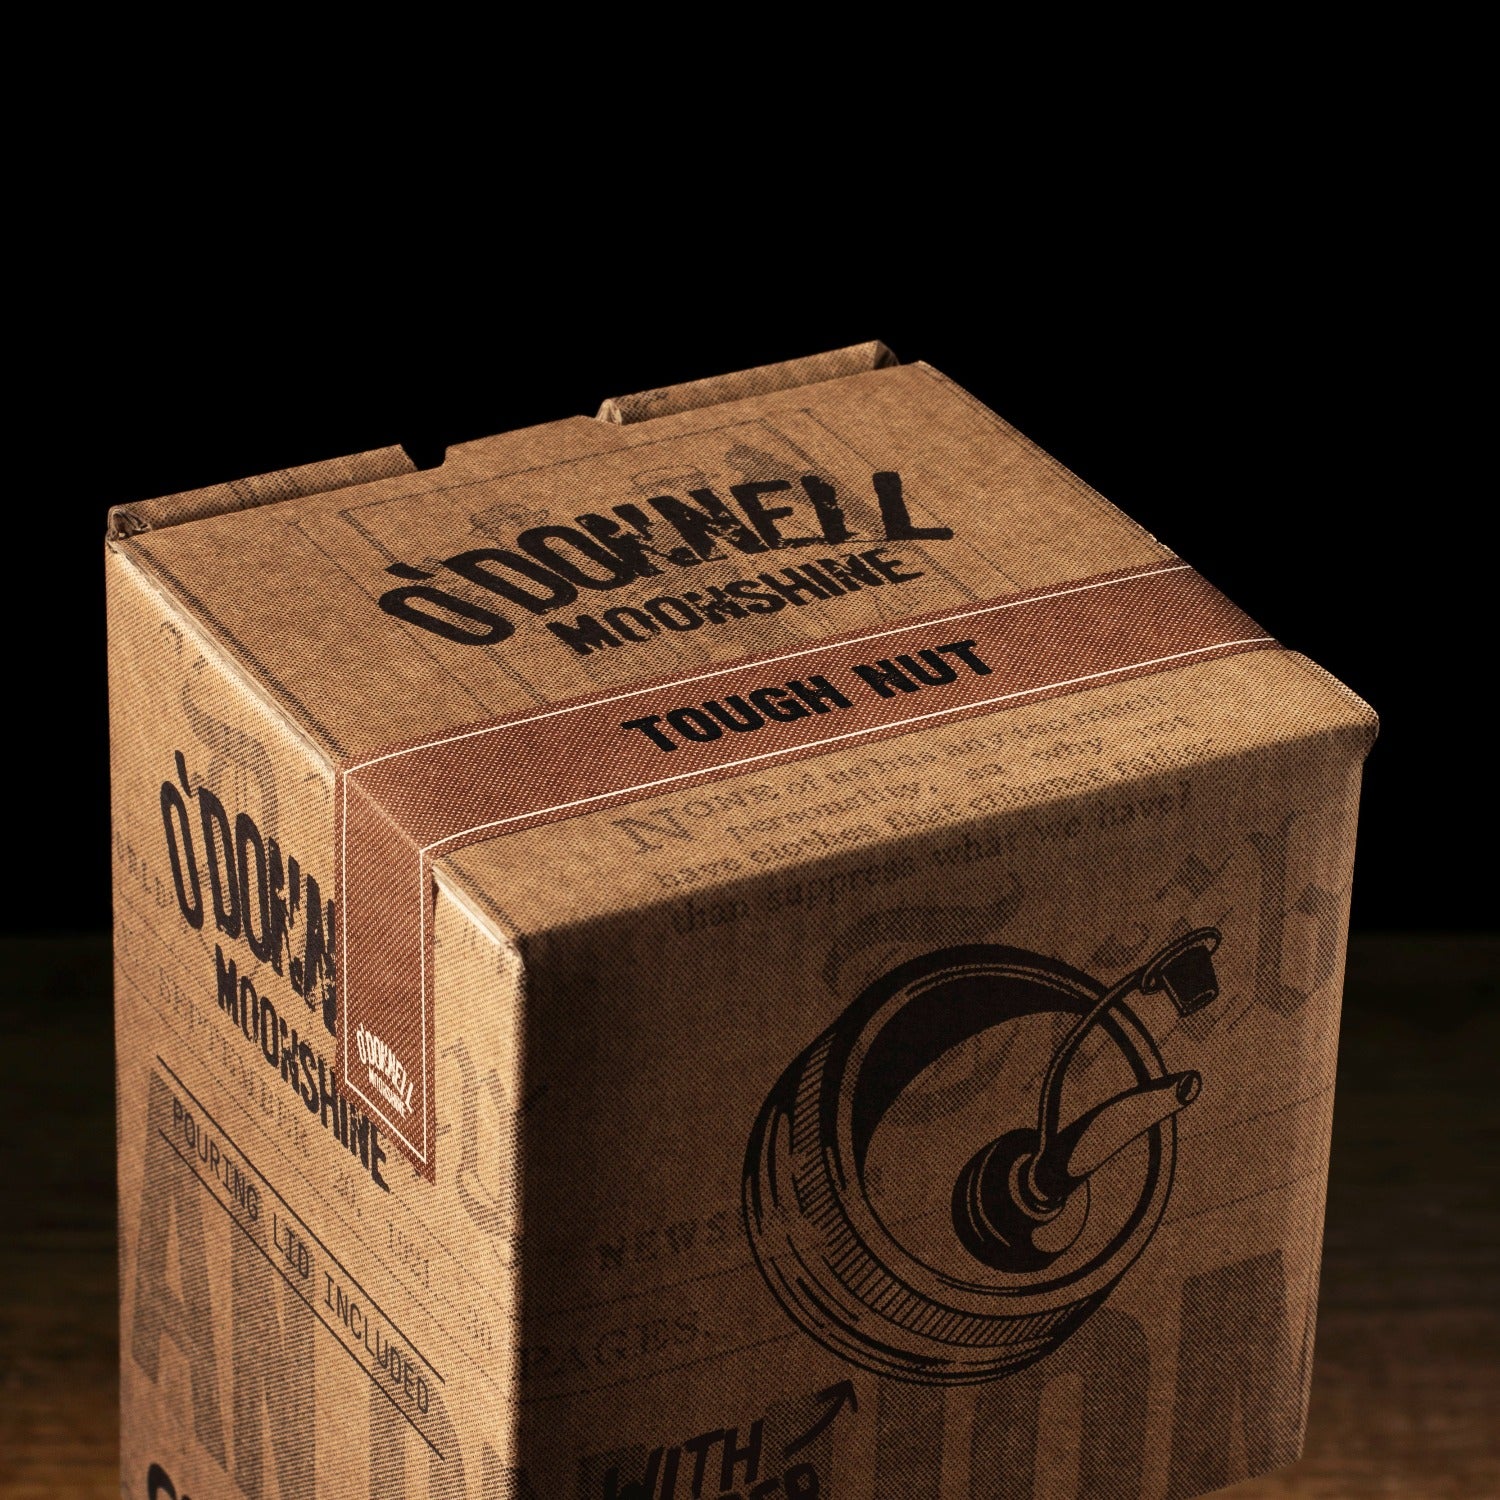 O Donnell Moonshine Tough Nut gift set from above 